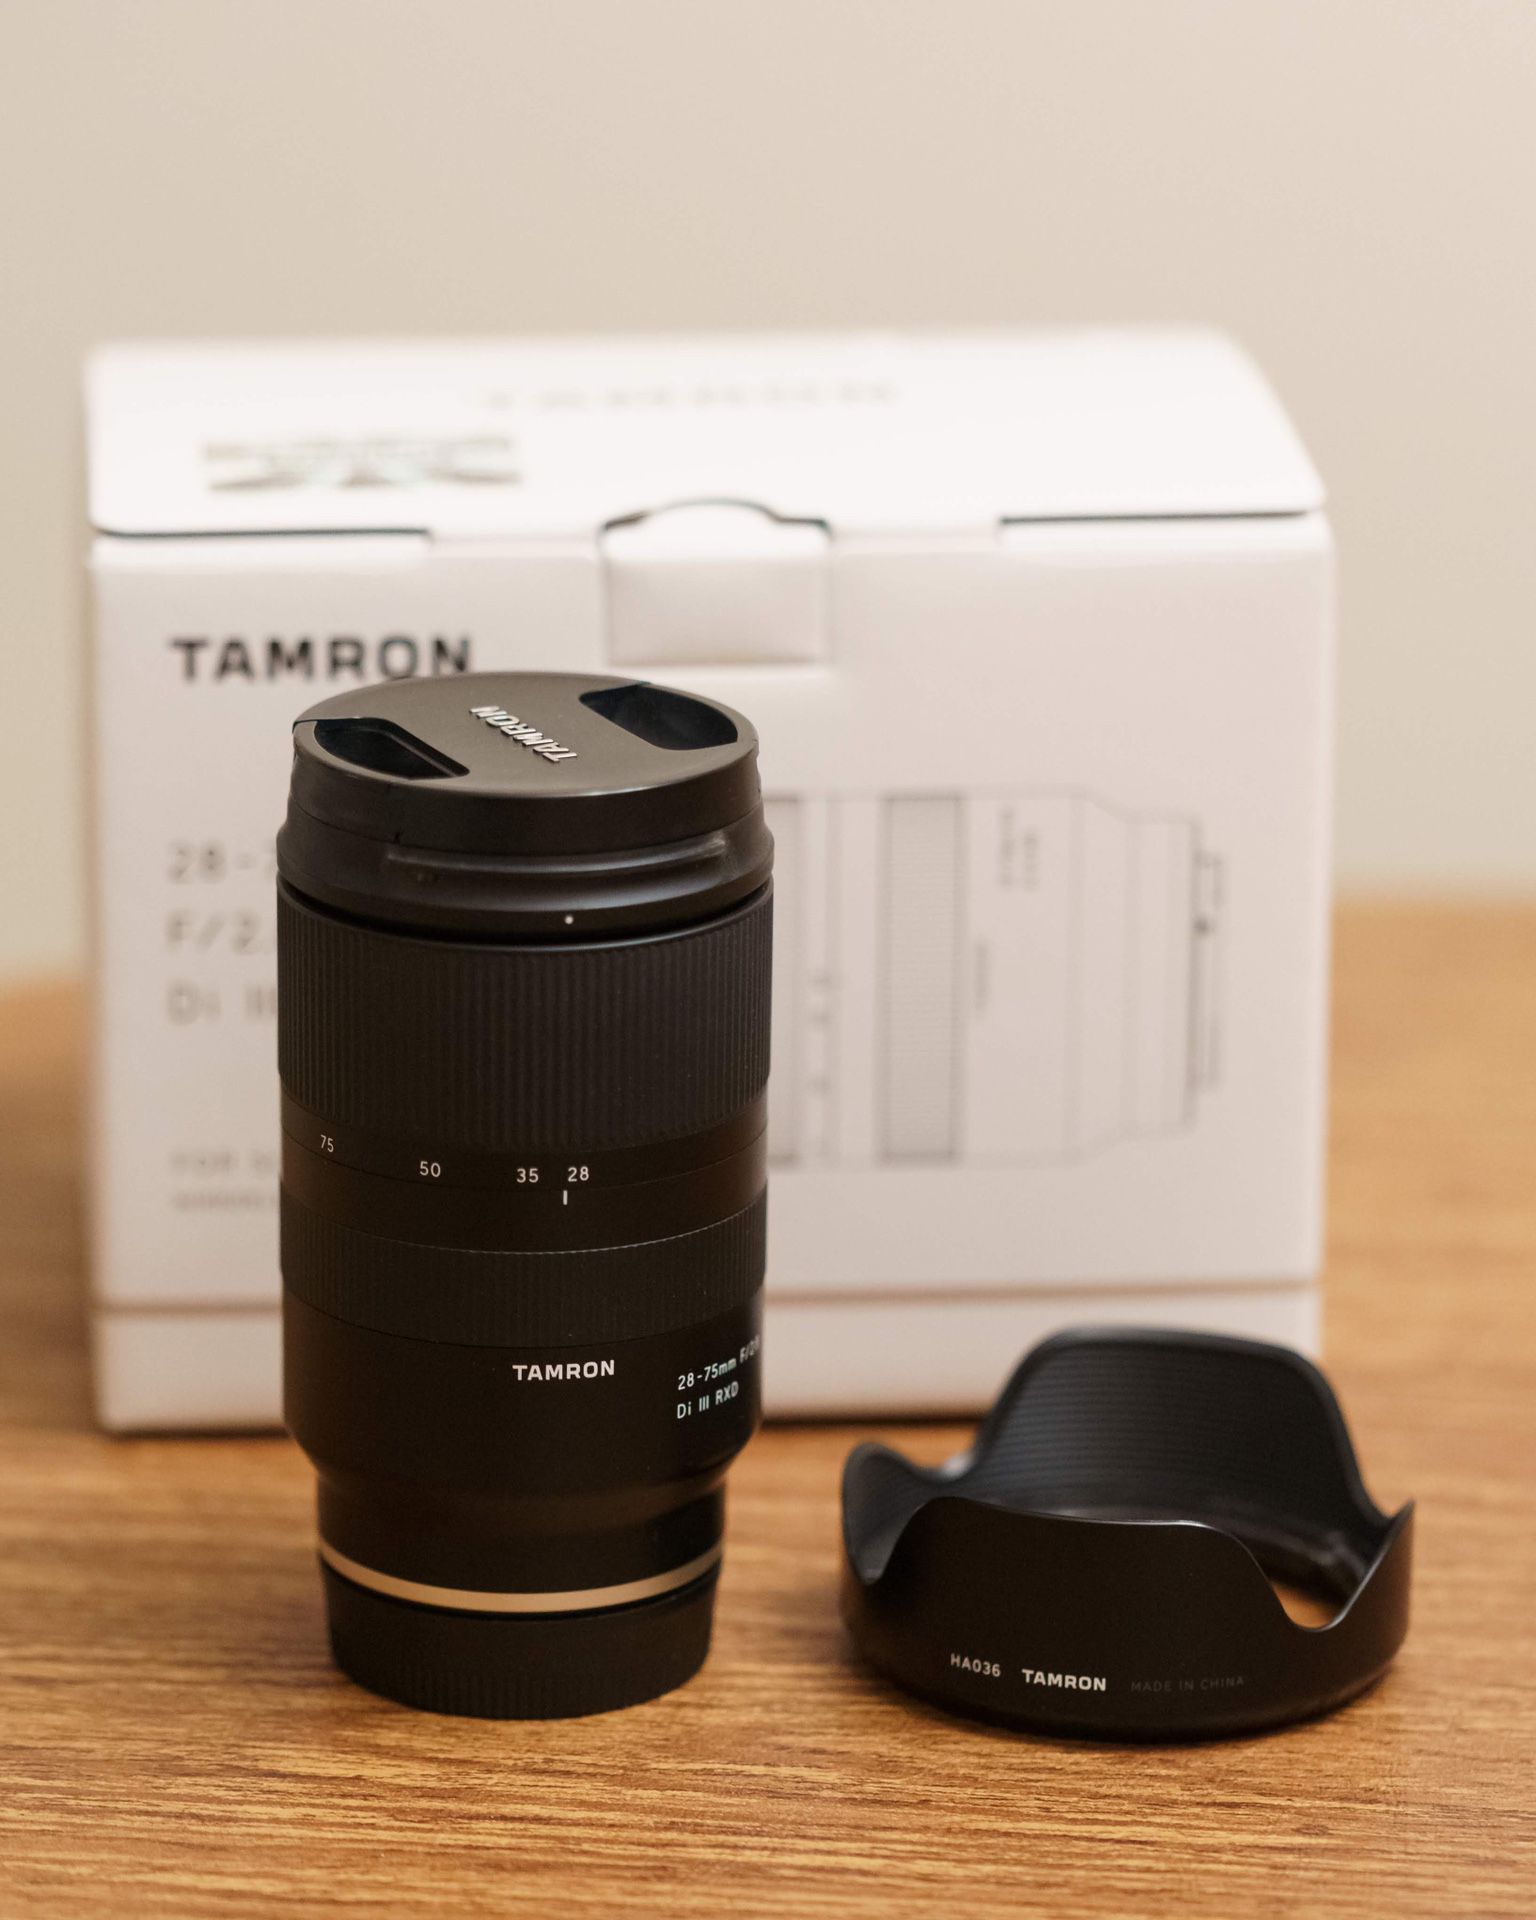 Tamron 28-75mm f/2.8 Di III RXD Lens for Sony E mount